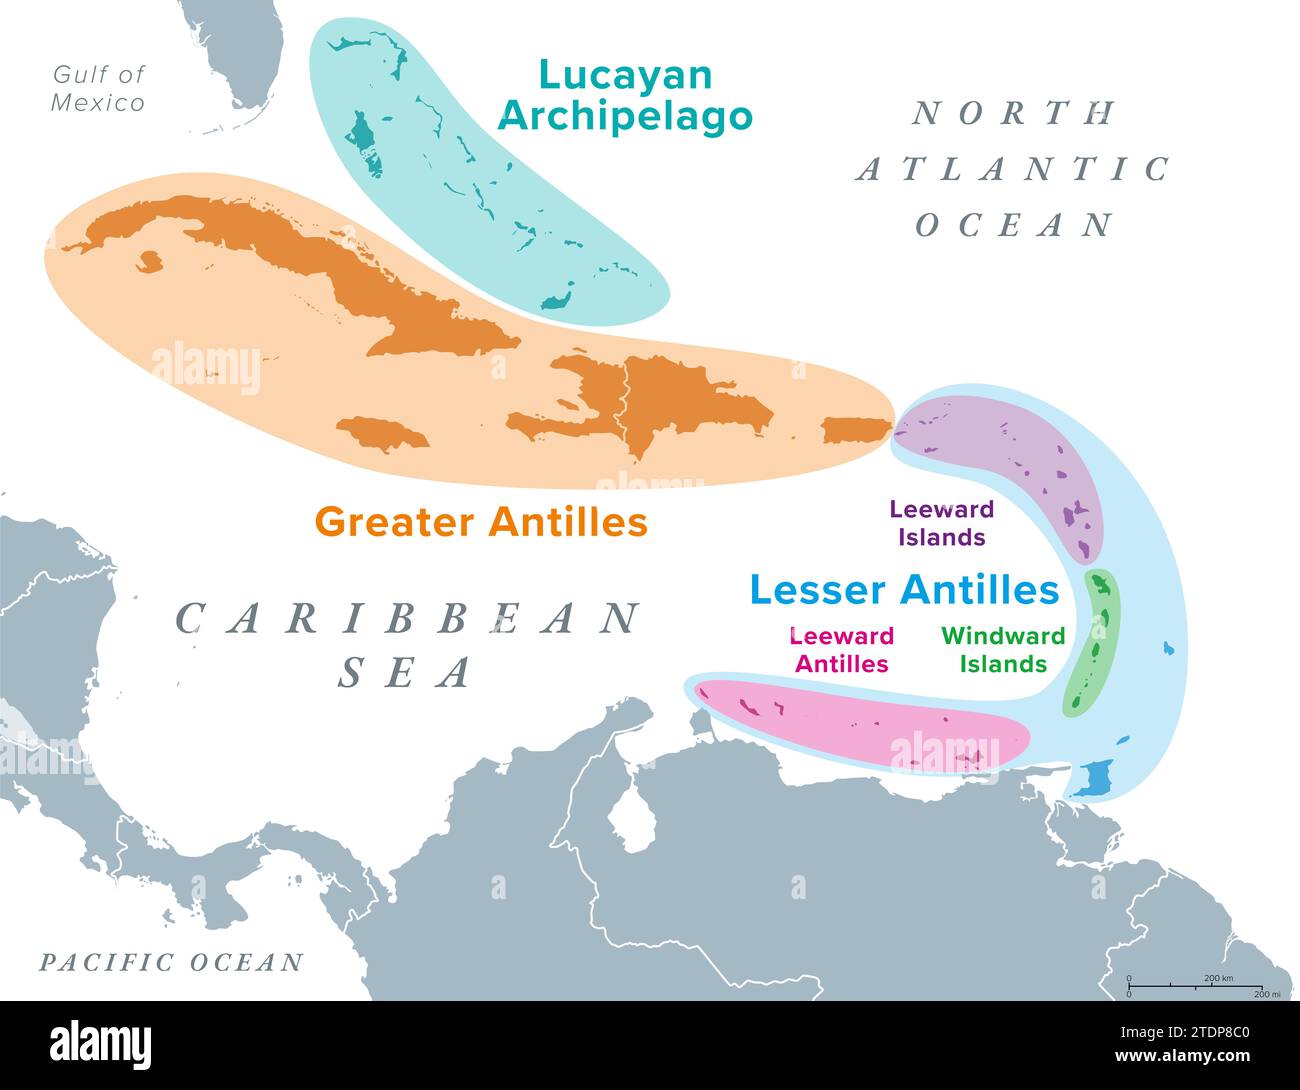 Island groups of the West Indies, political map. Subregion of the Americas, surrounded by North Atlantic Ocean and Caribbean Sea. Stock Photo